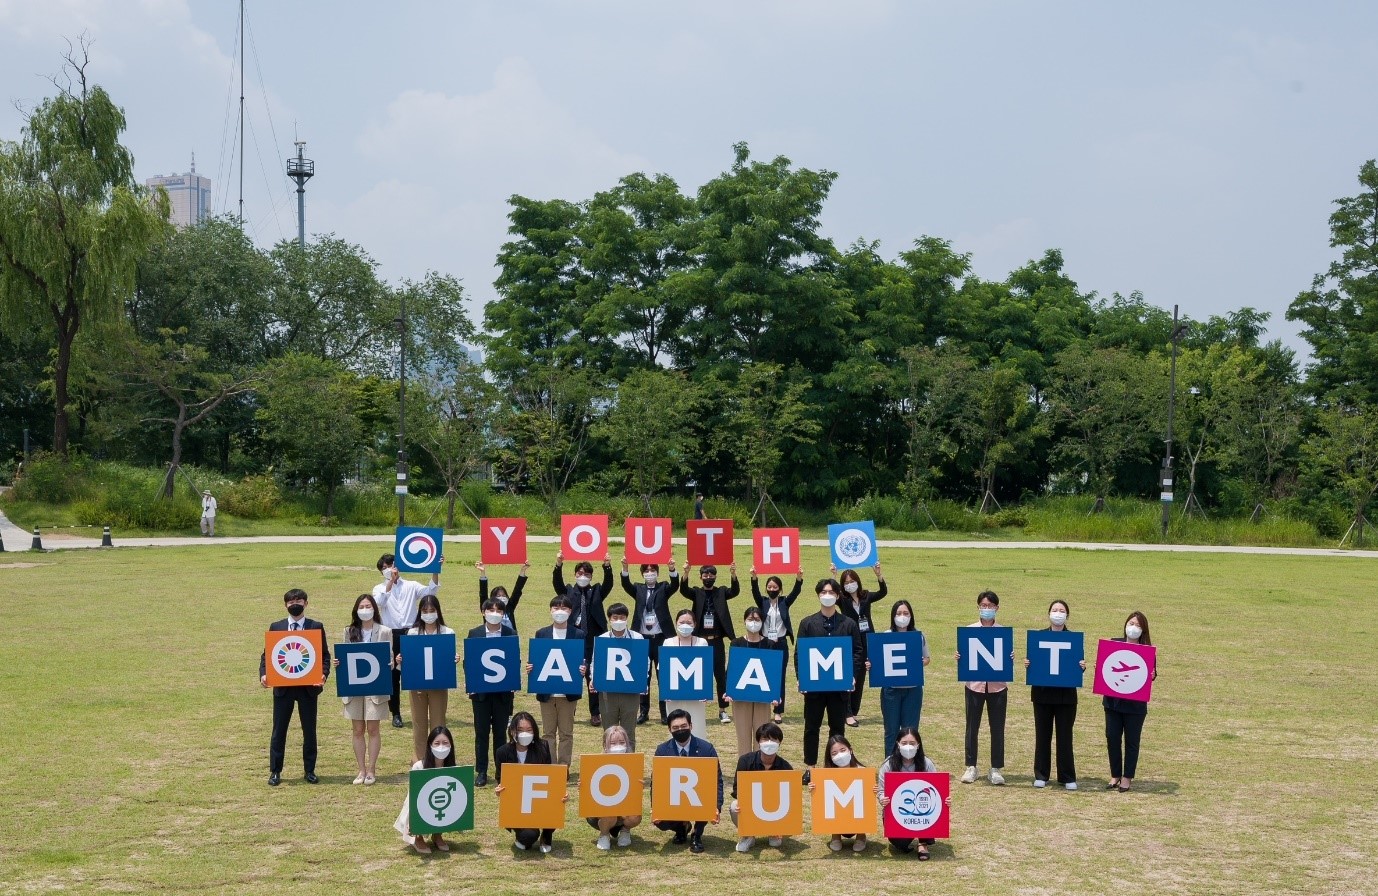 Secretariat of the Youth Forum, Monday, June 28, 2021, Press release picture